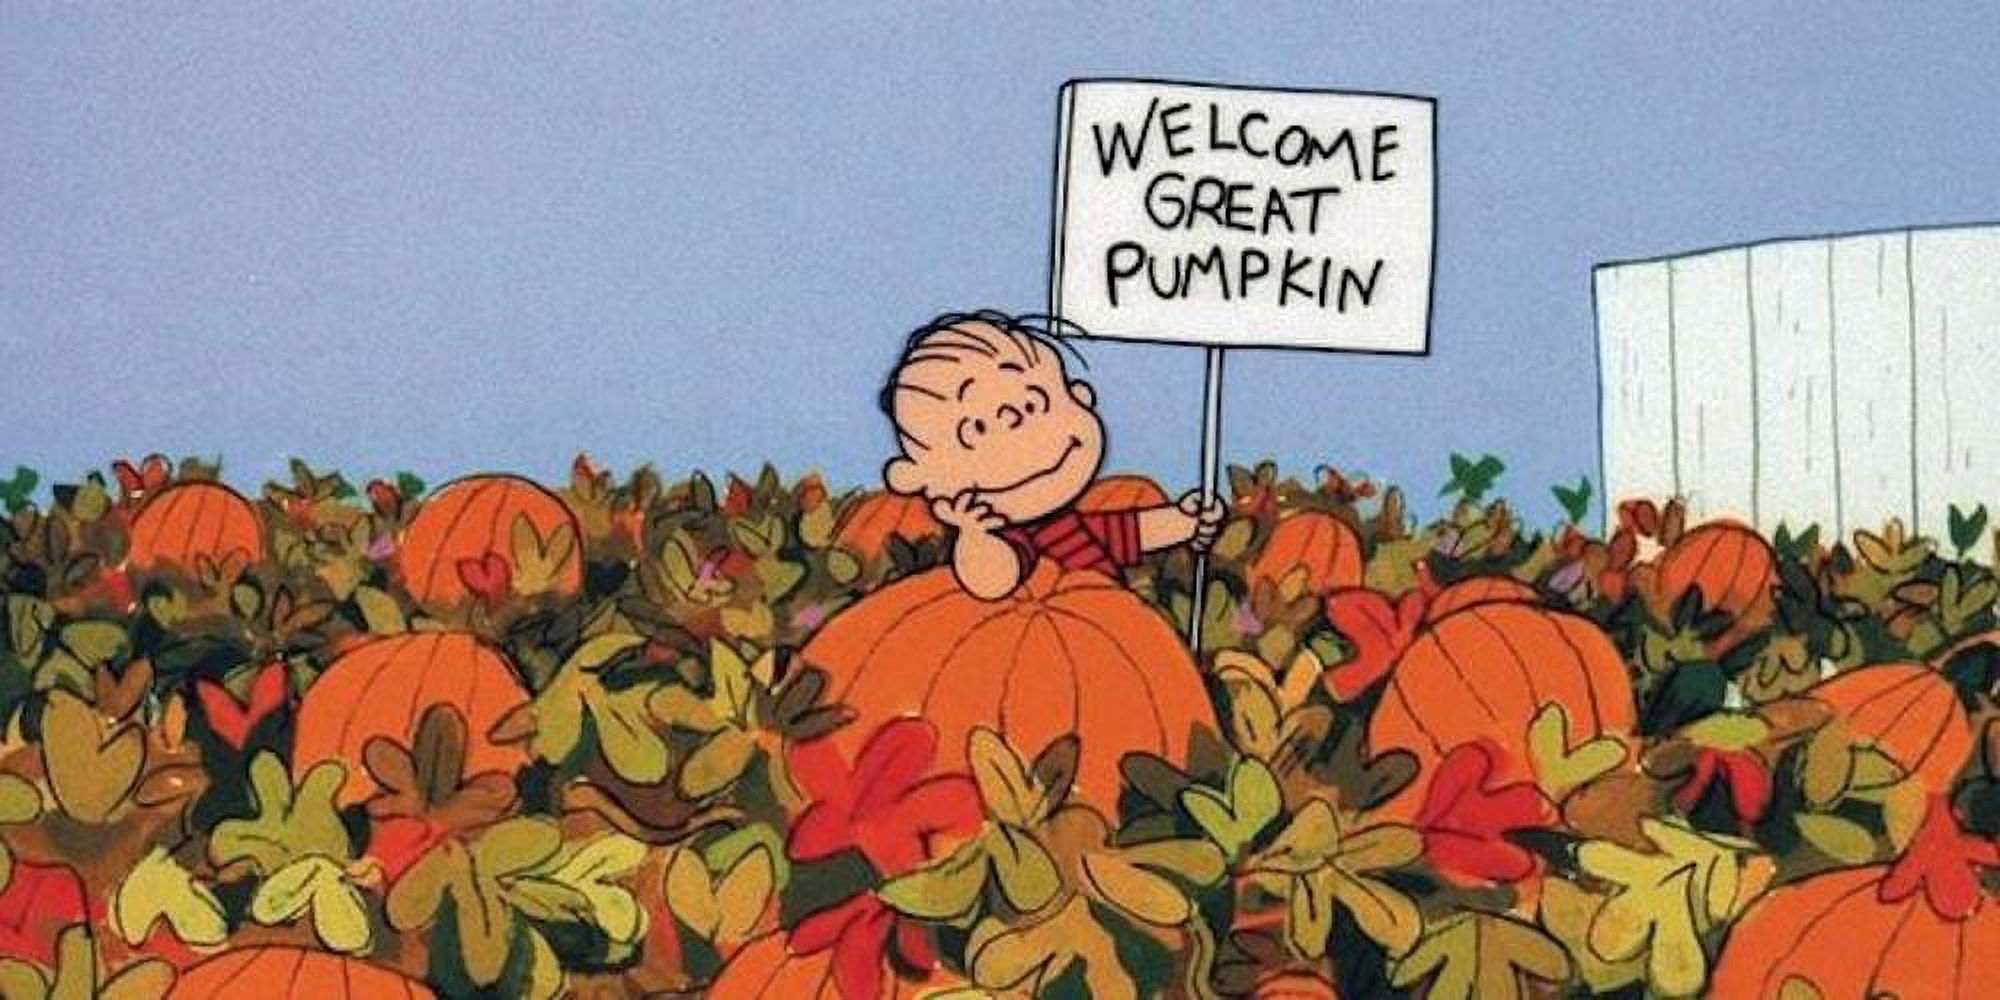 It's the Great Pumpkin, Charlie Brown (DVD), Warner Home Video, Animation - image 5 of 9